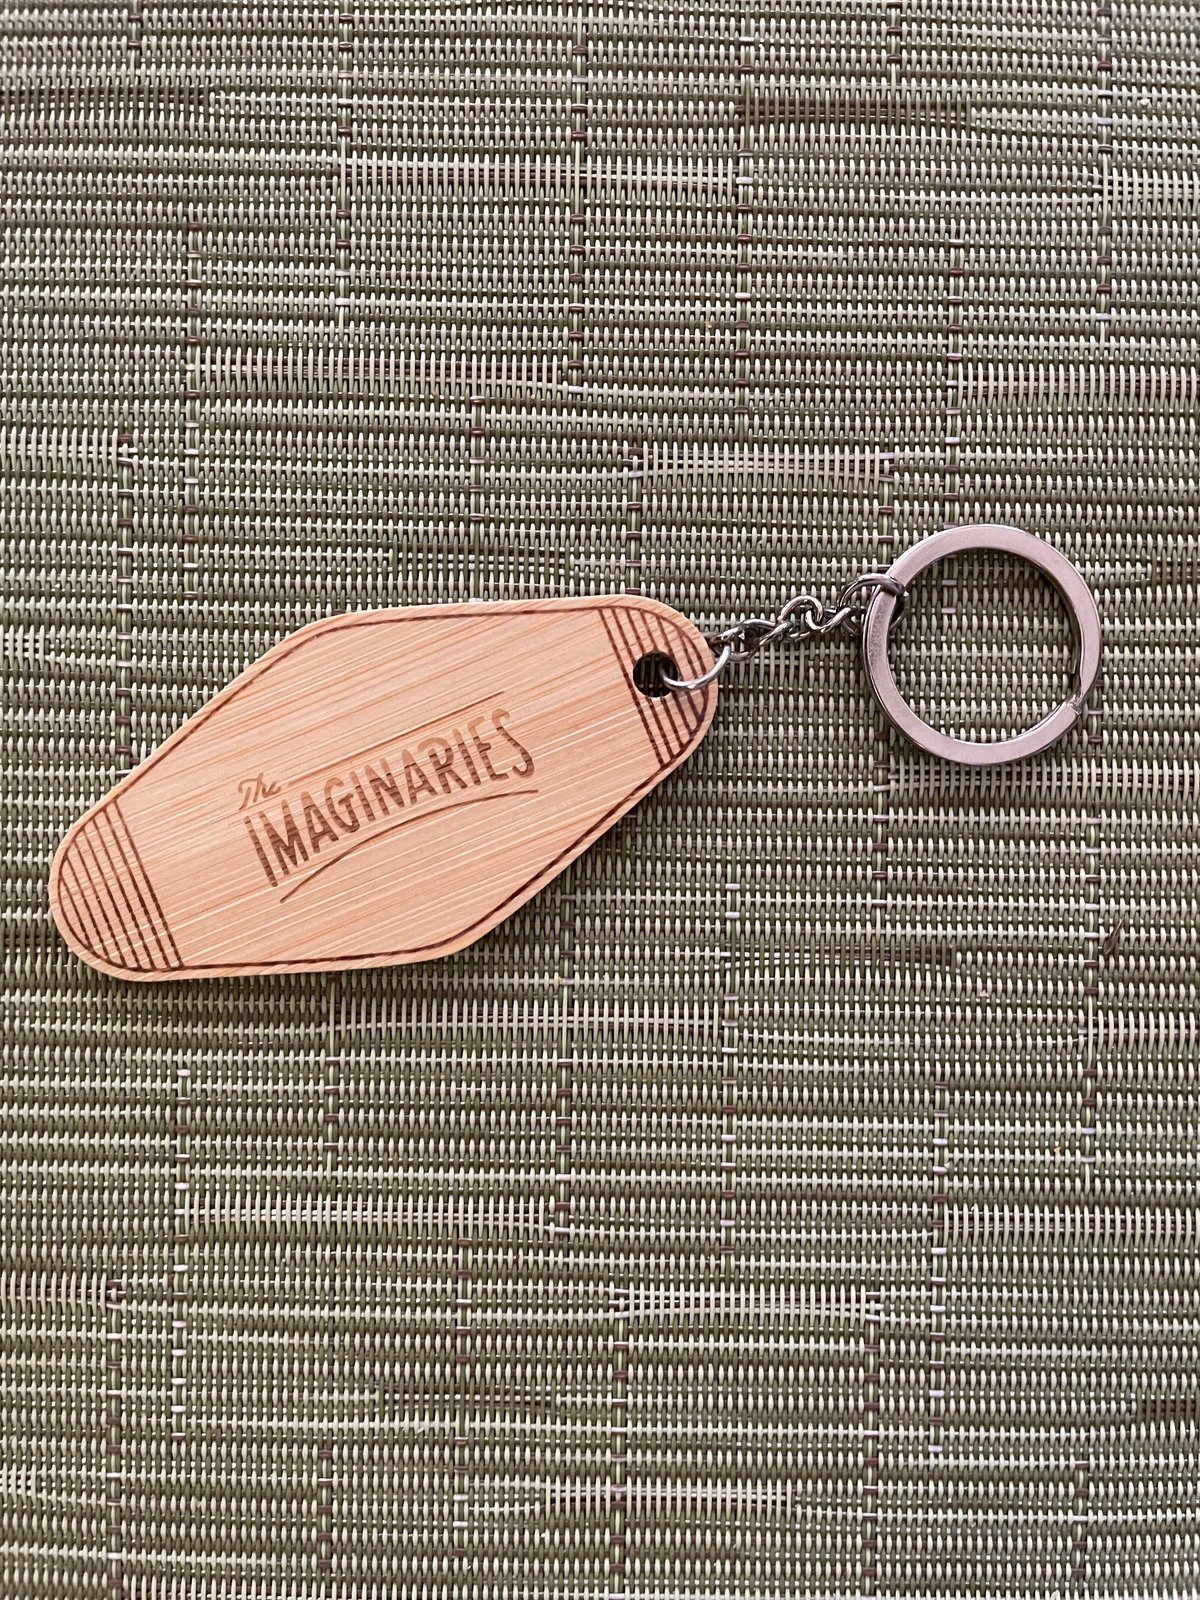 Image of The Imaginaries Key Chain